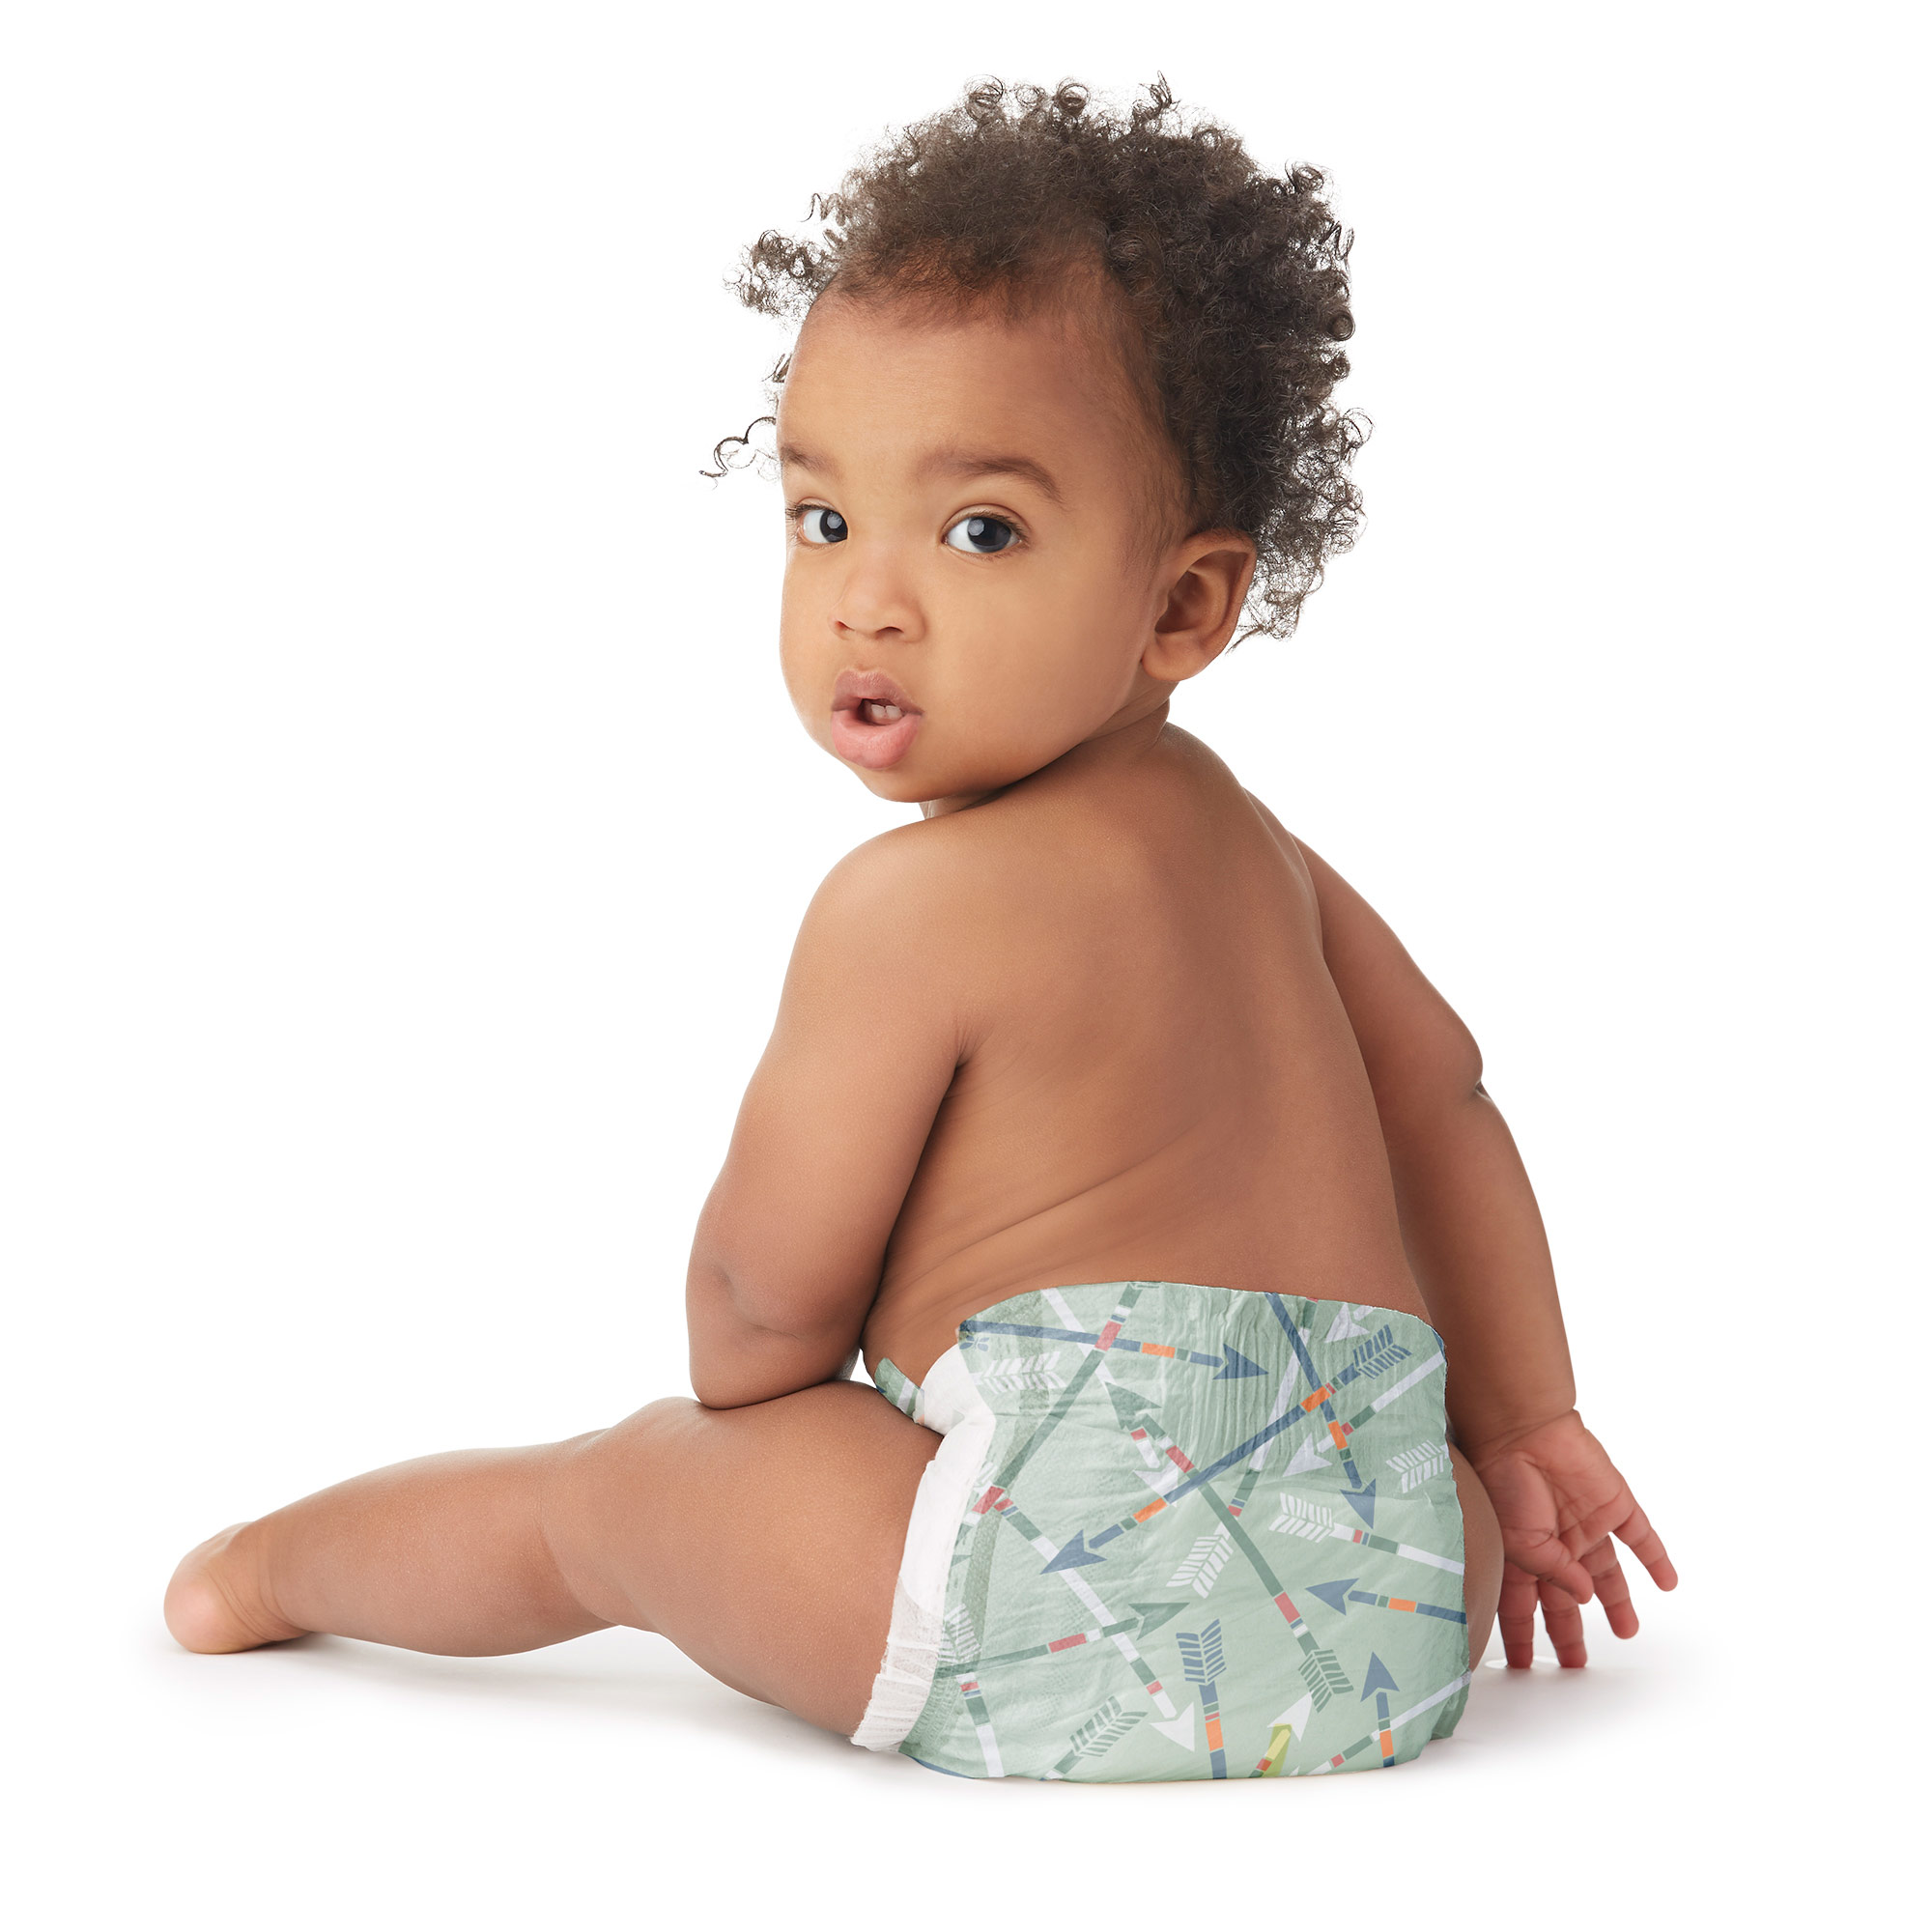 Honest Clean Conscious Baby Diaper, Dots & Dashes, Size 2, Advanced Leak protection, Plant-Based